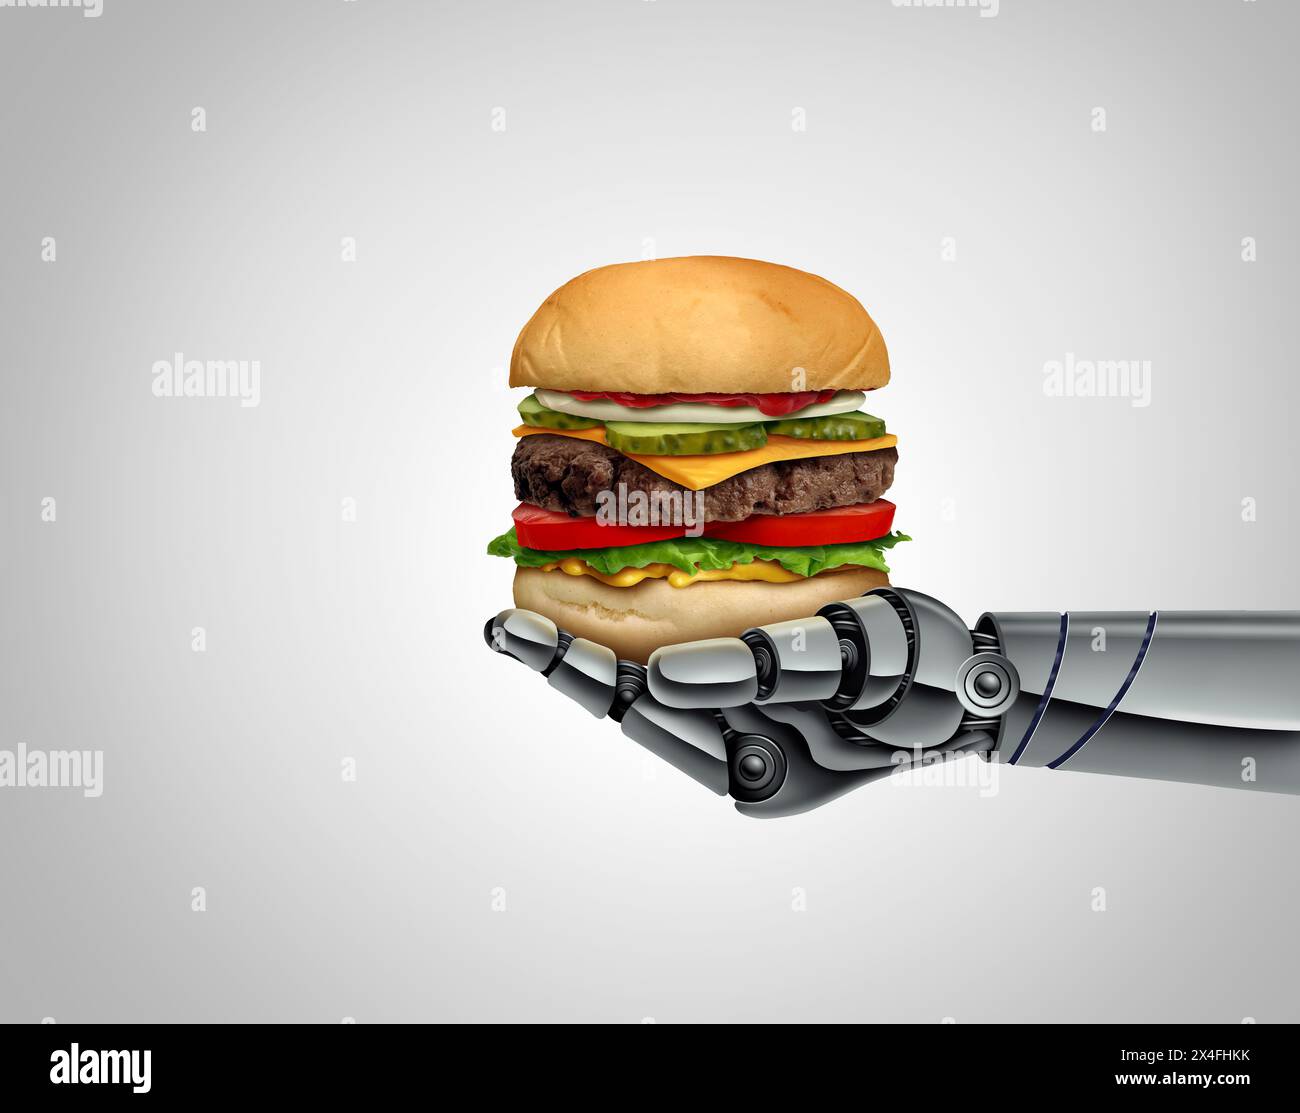 Robot Cooking and kitchen robotics as the future of preparing food as a hamburger created by a machine and computer software and Precision cooking. Stock Photo